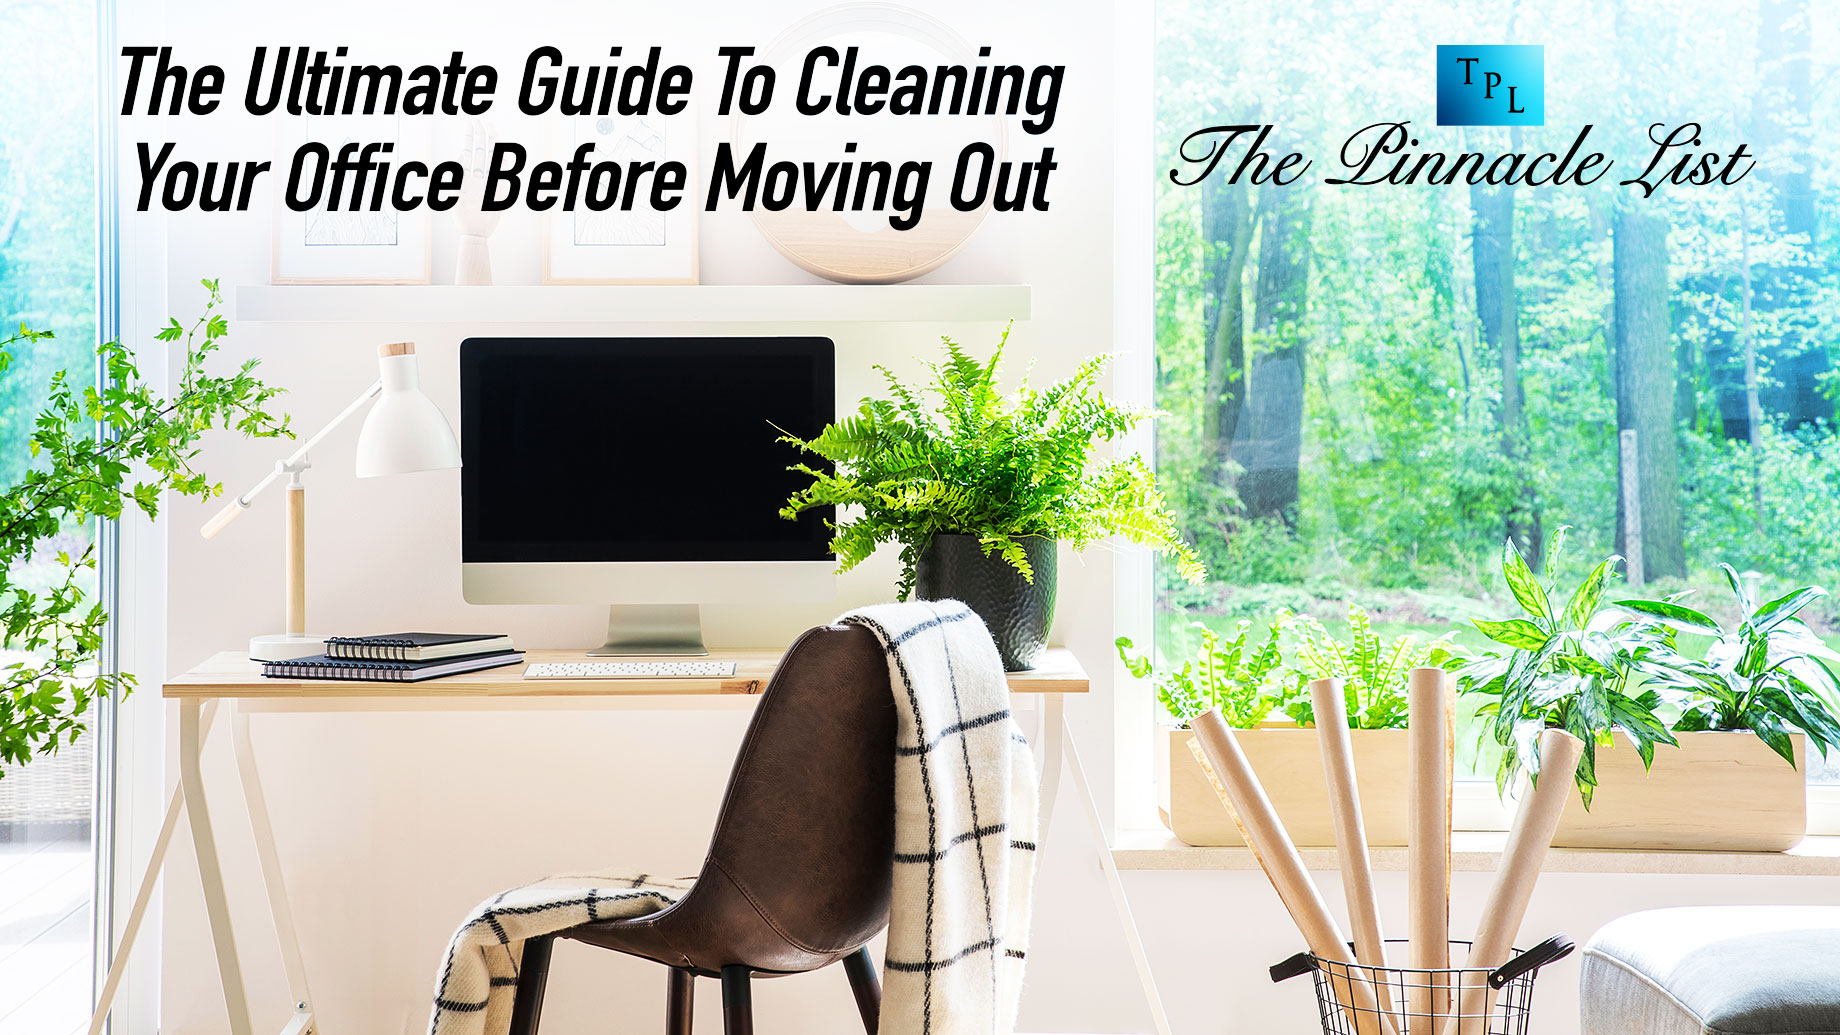 The Ultimate Guide To Cleaning Your Office Before Moving Out